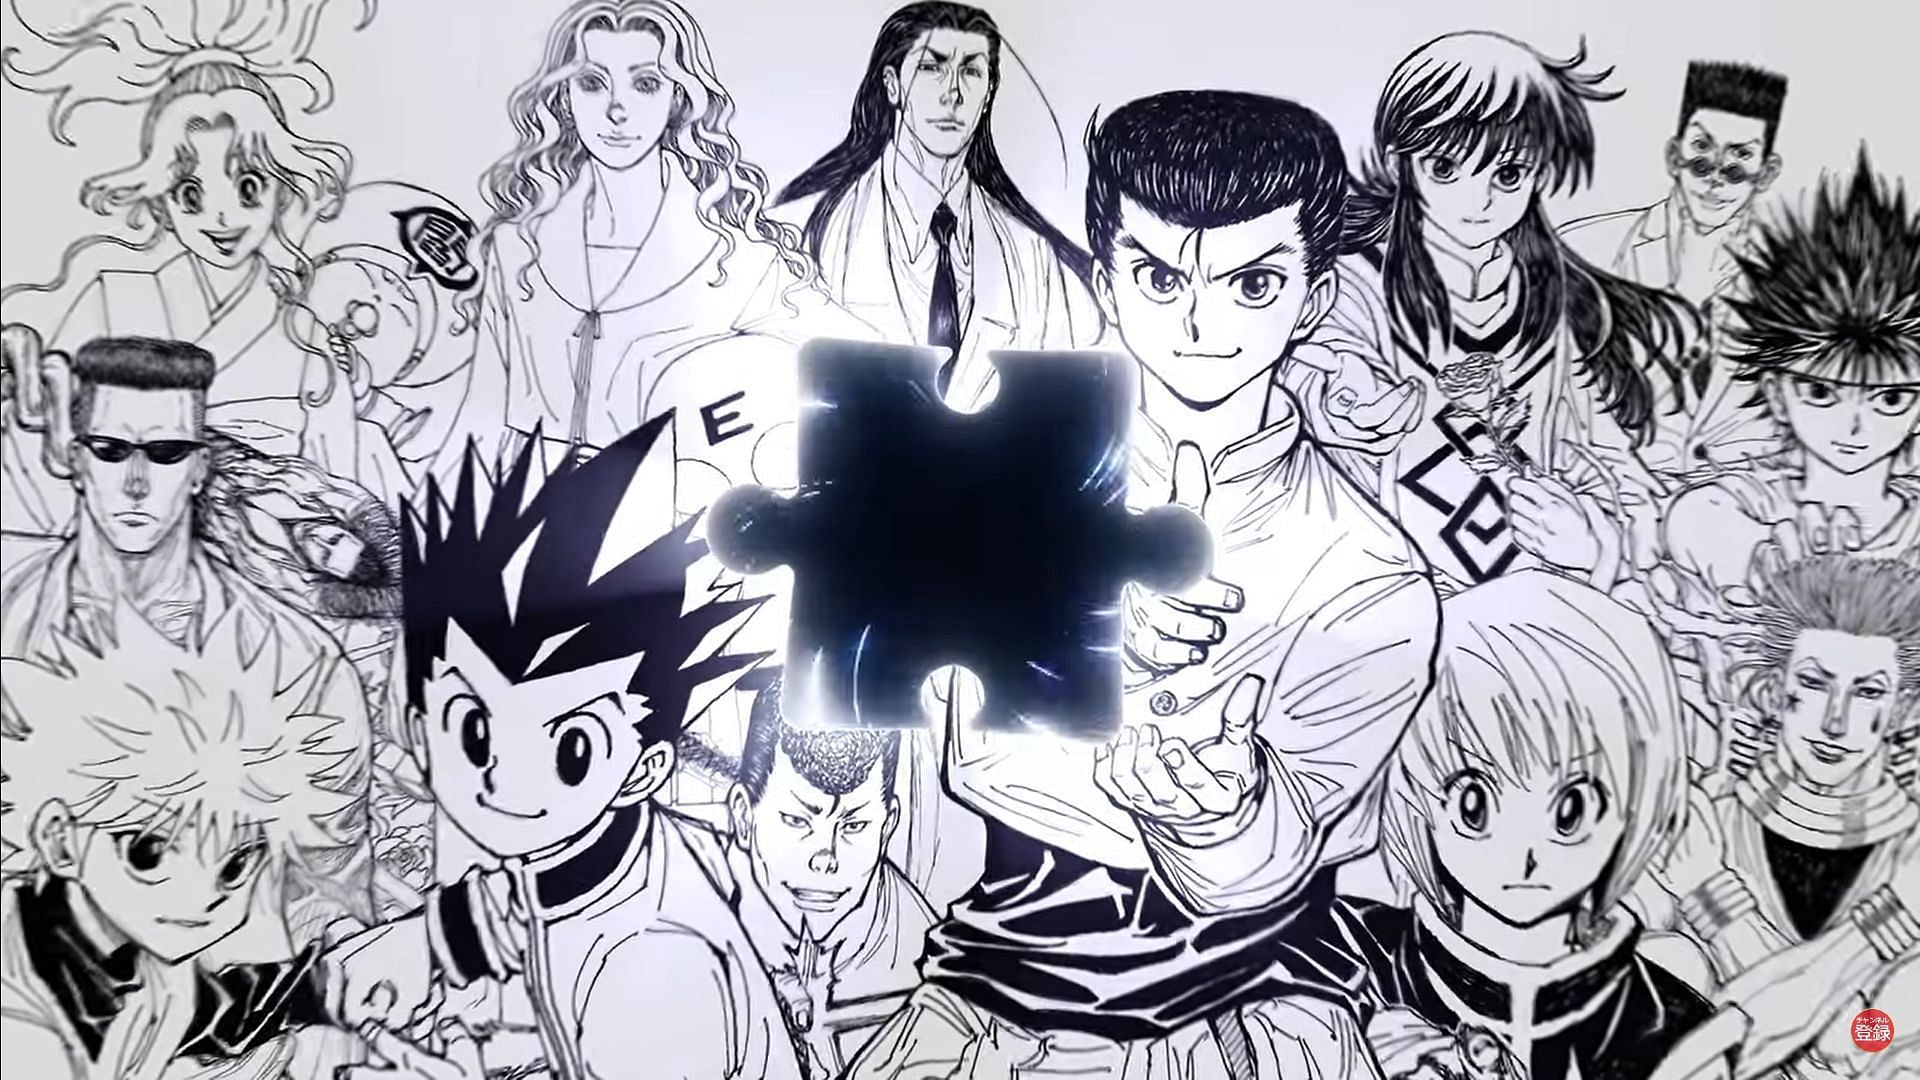 Hunter x Hunter Anime Is Reportedly Returning With a New PV